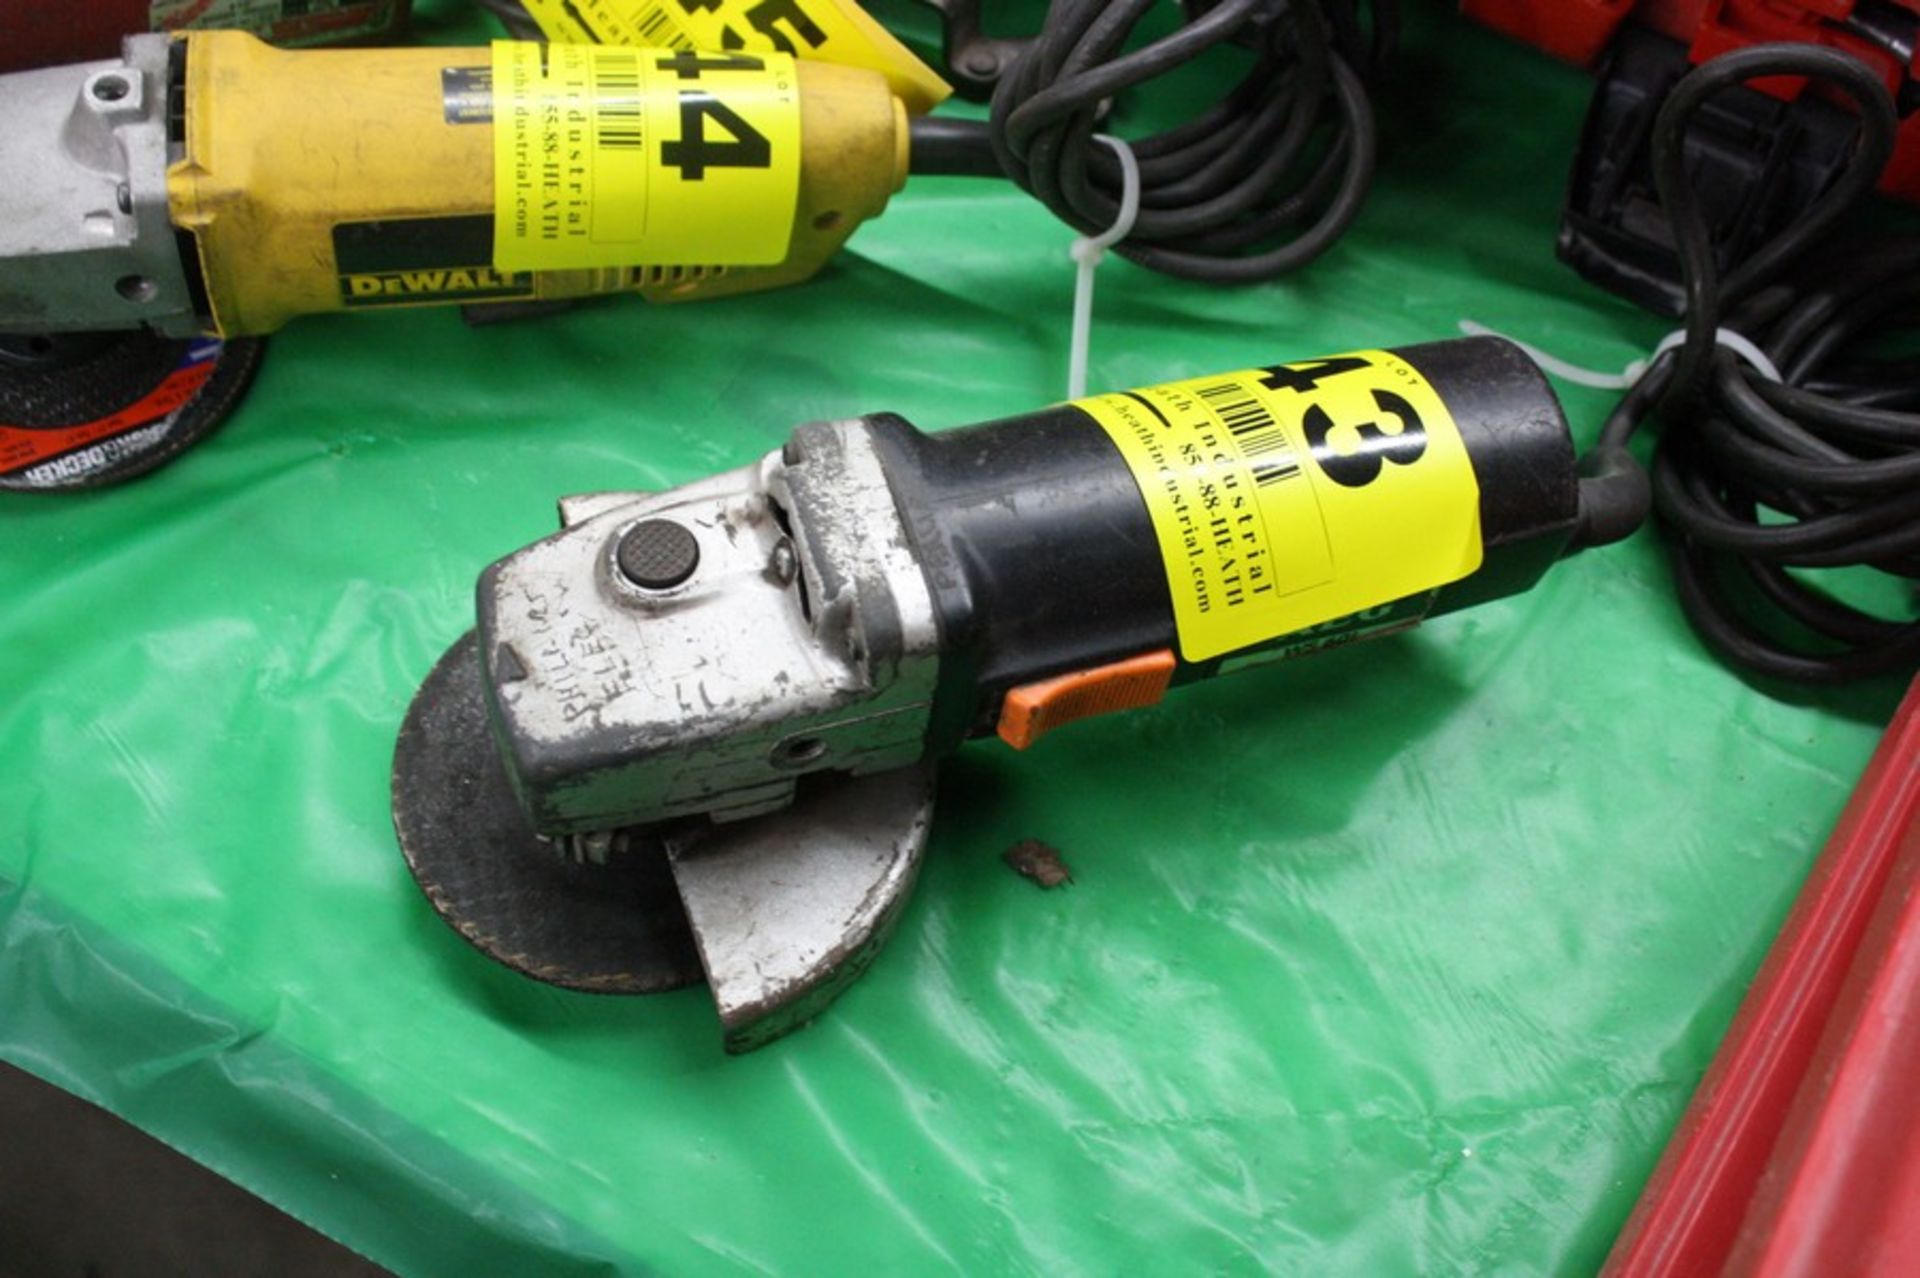 AEG MODEL WS601, 4 1/2'' RIGHT ANGLE GRINDER